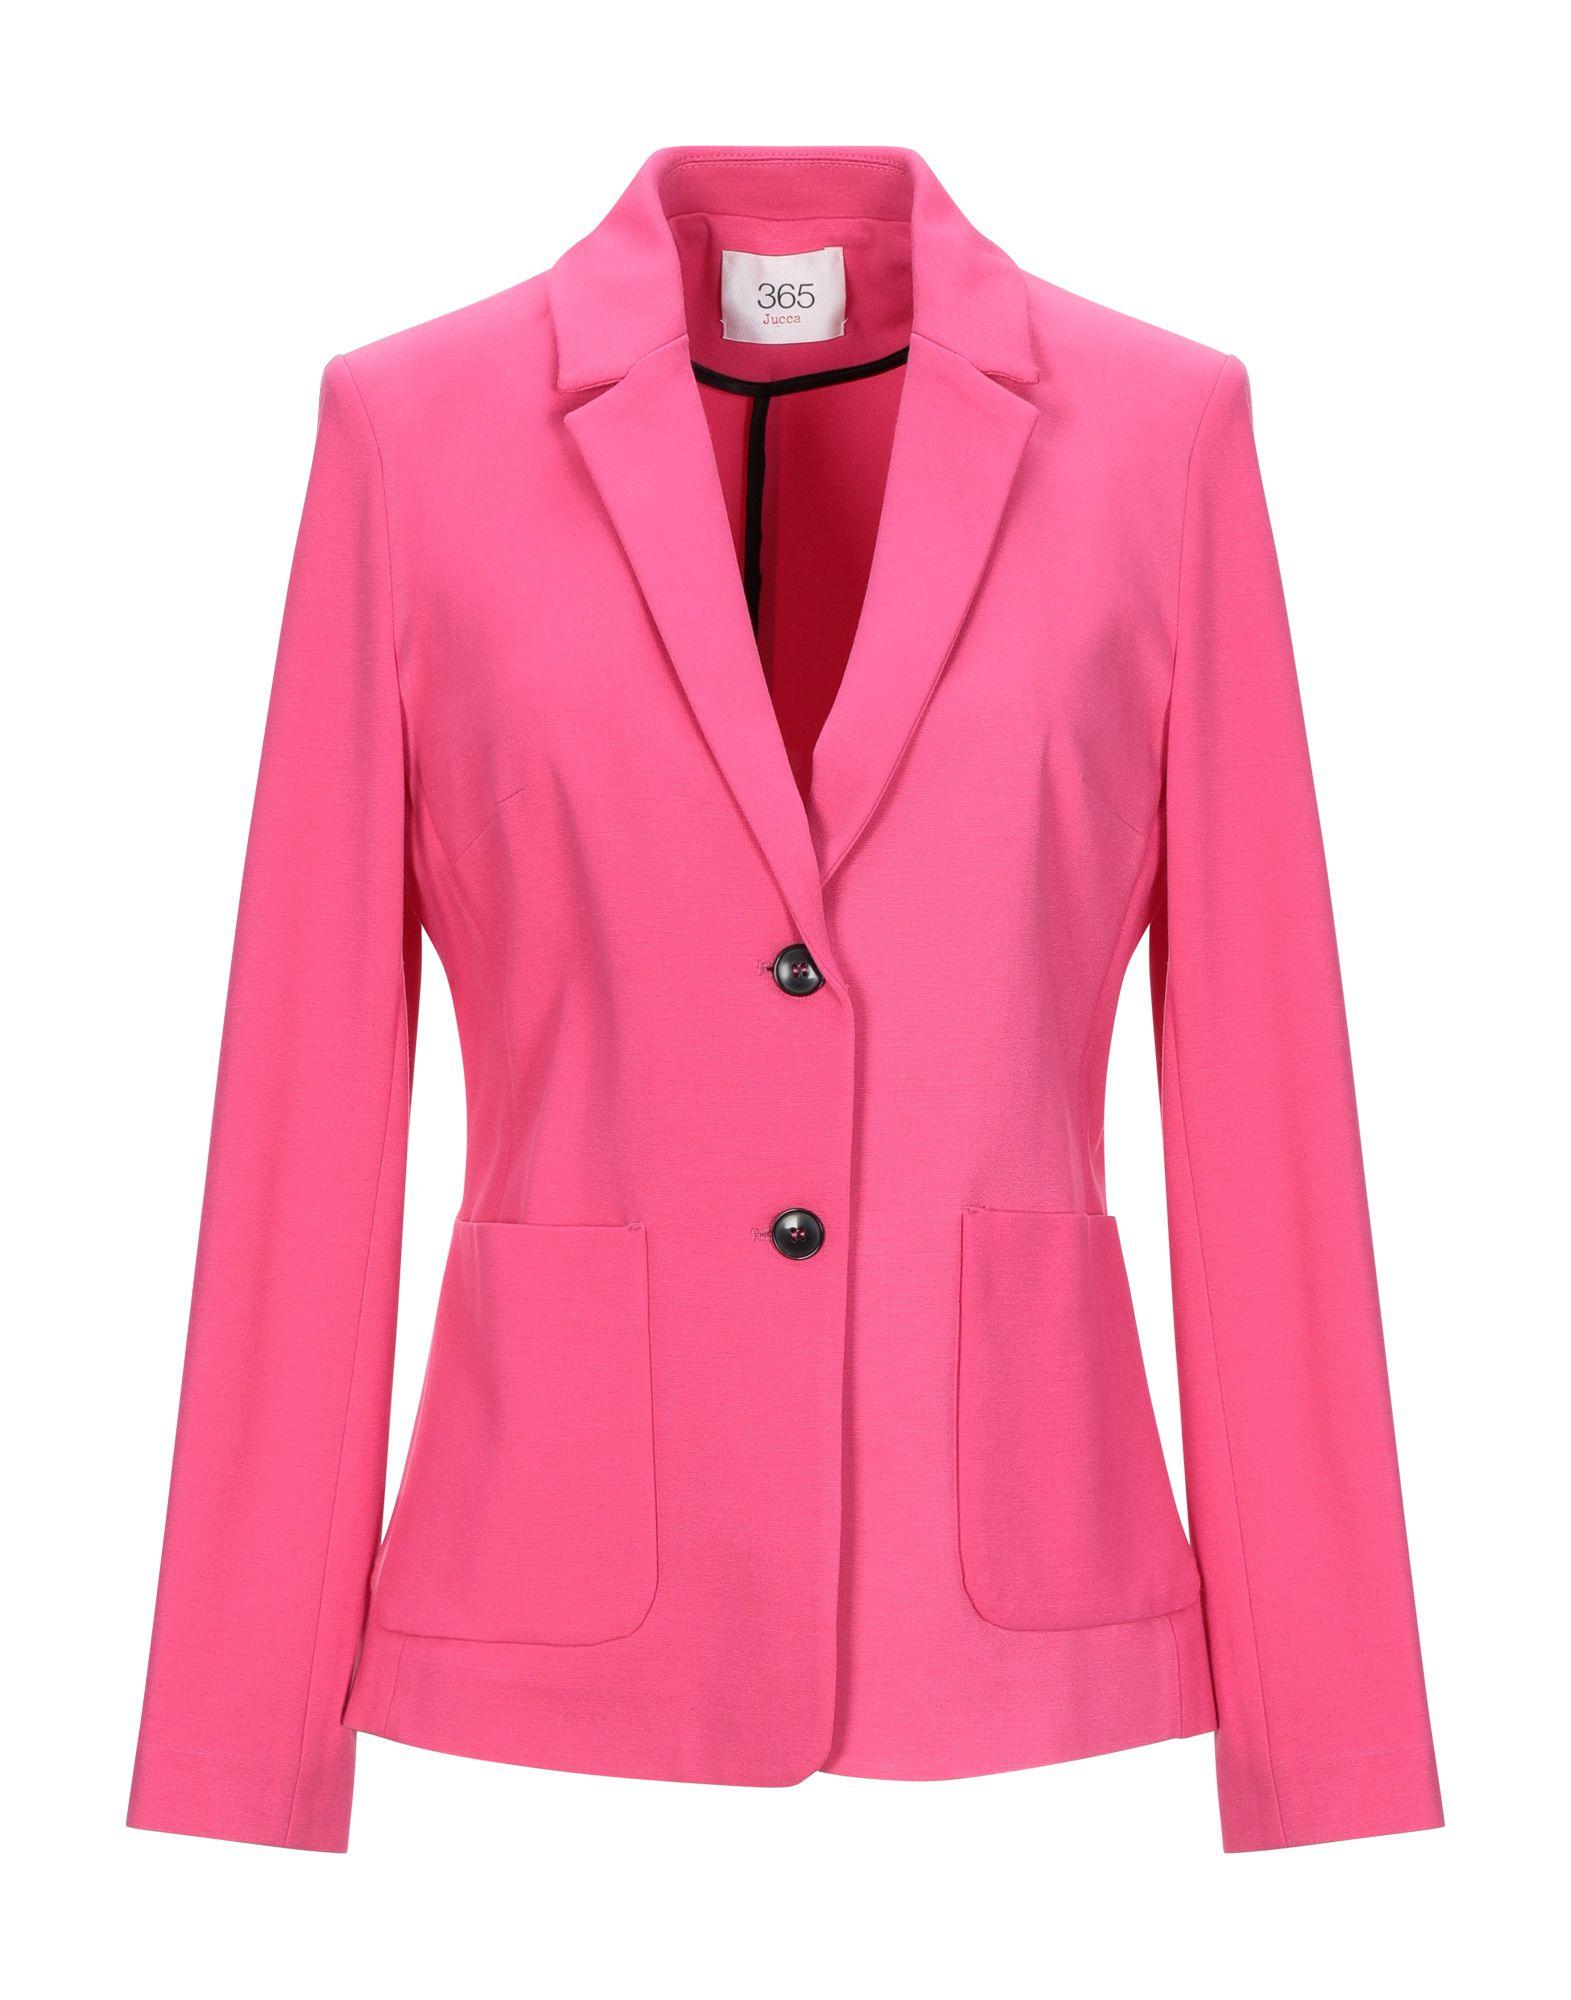 Jucca Synthetic Blazer in Fuchsia (Pink) - Lyst